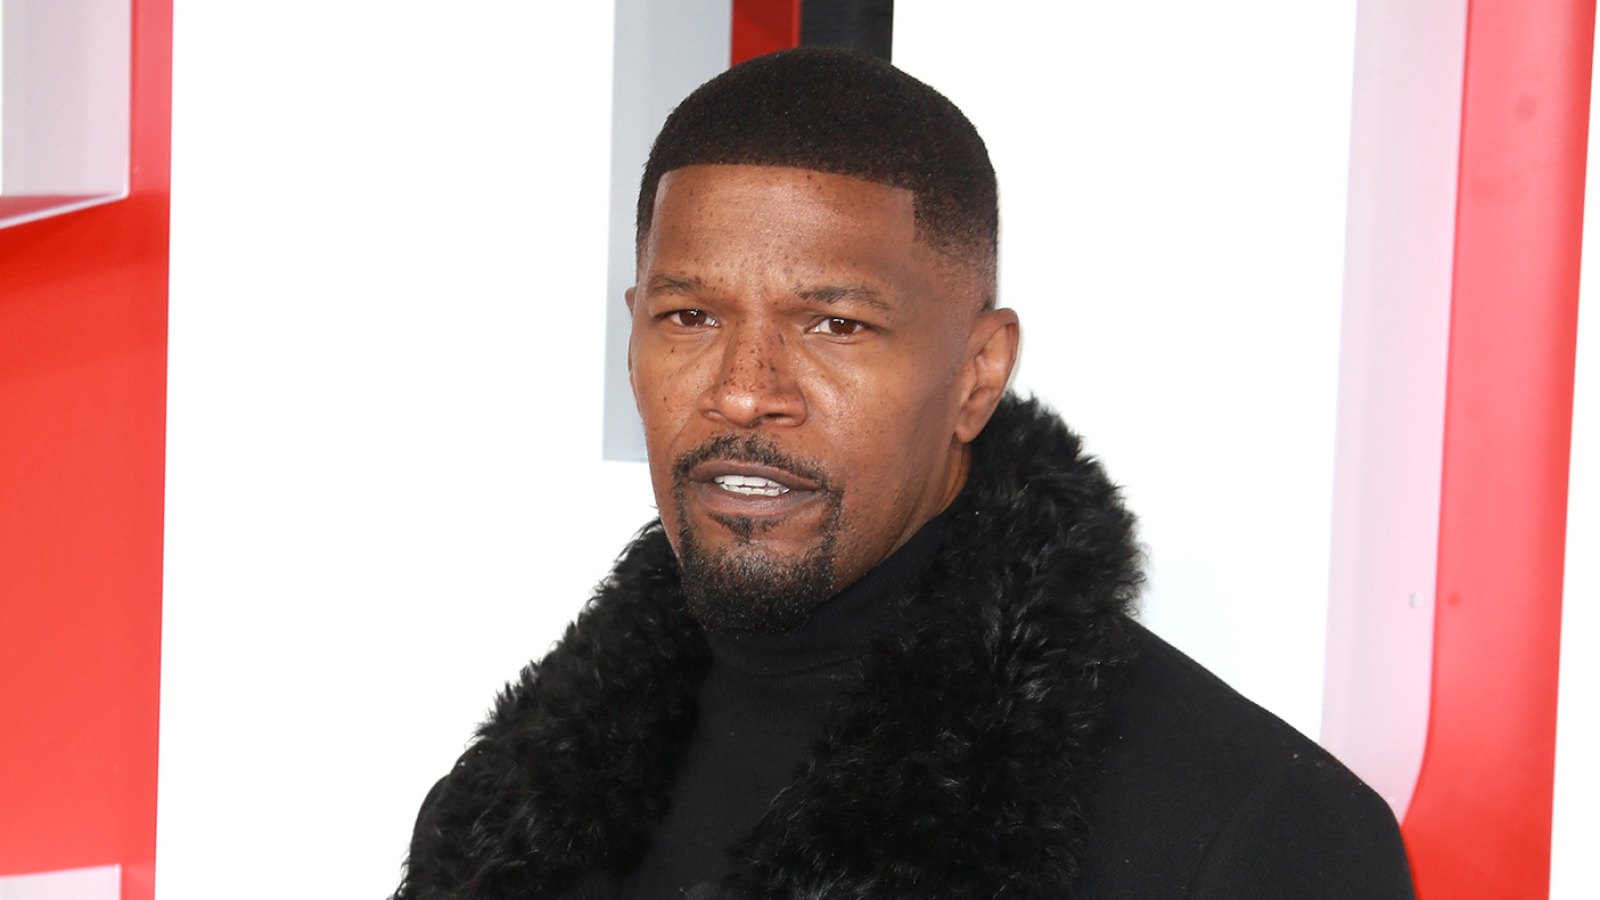 Jamie Foxx Breaks Silence Amid Ongoing Hospitalization for 'Medical Complication,' Thanks Fans for 'All the Love'